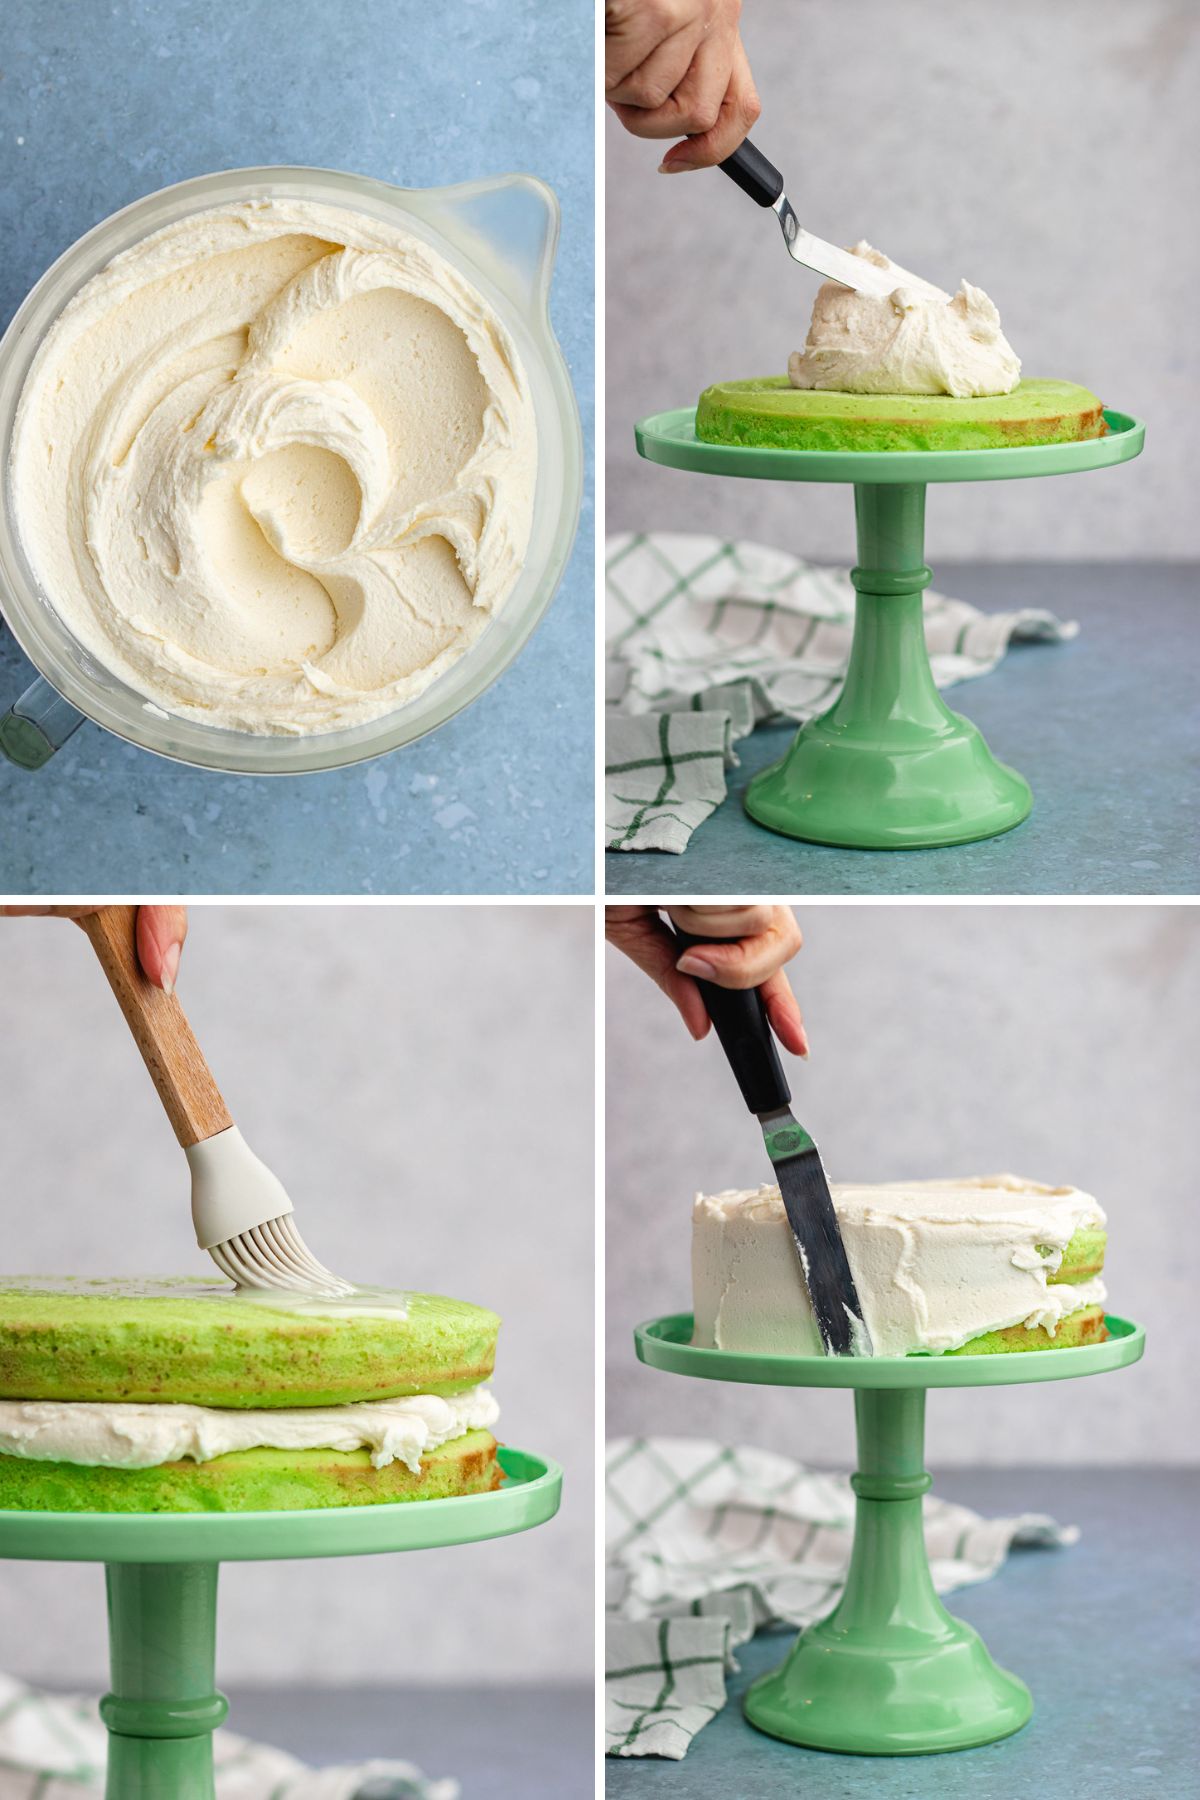 Key Lime Cake collage frosting cake on stand.